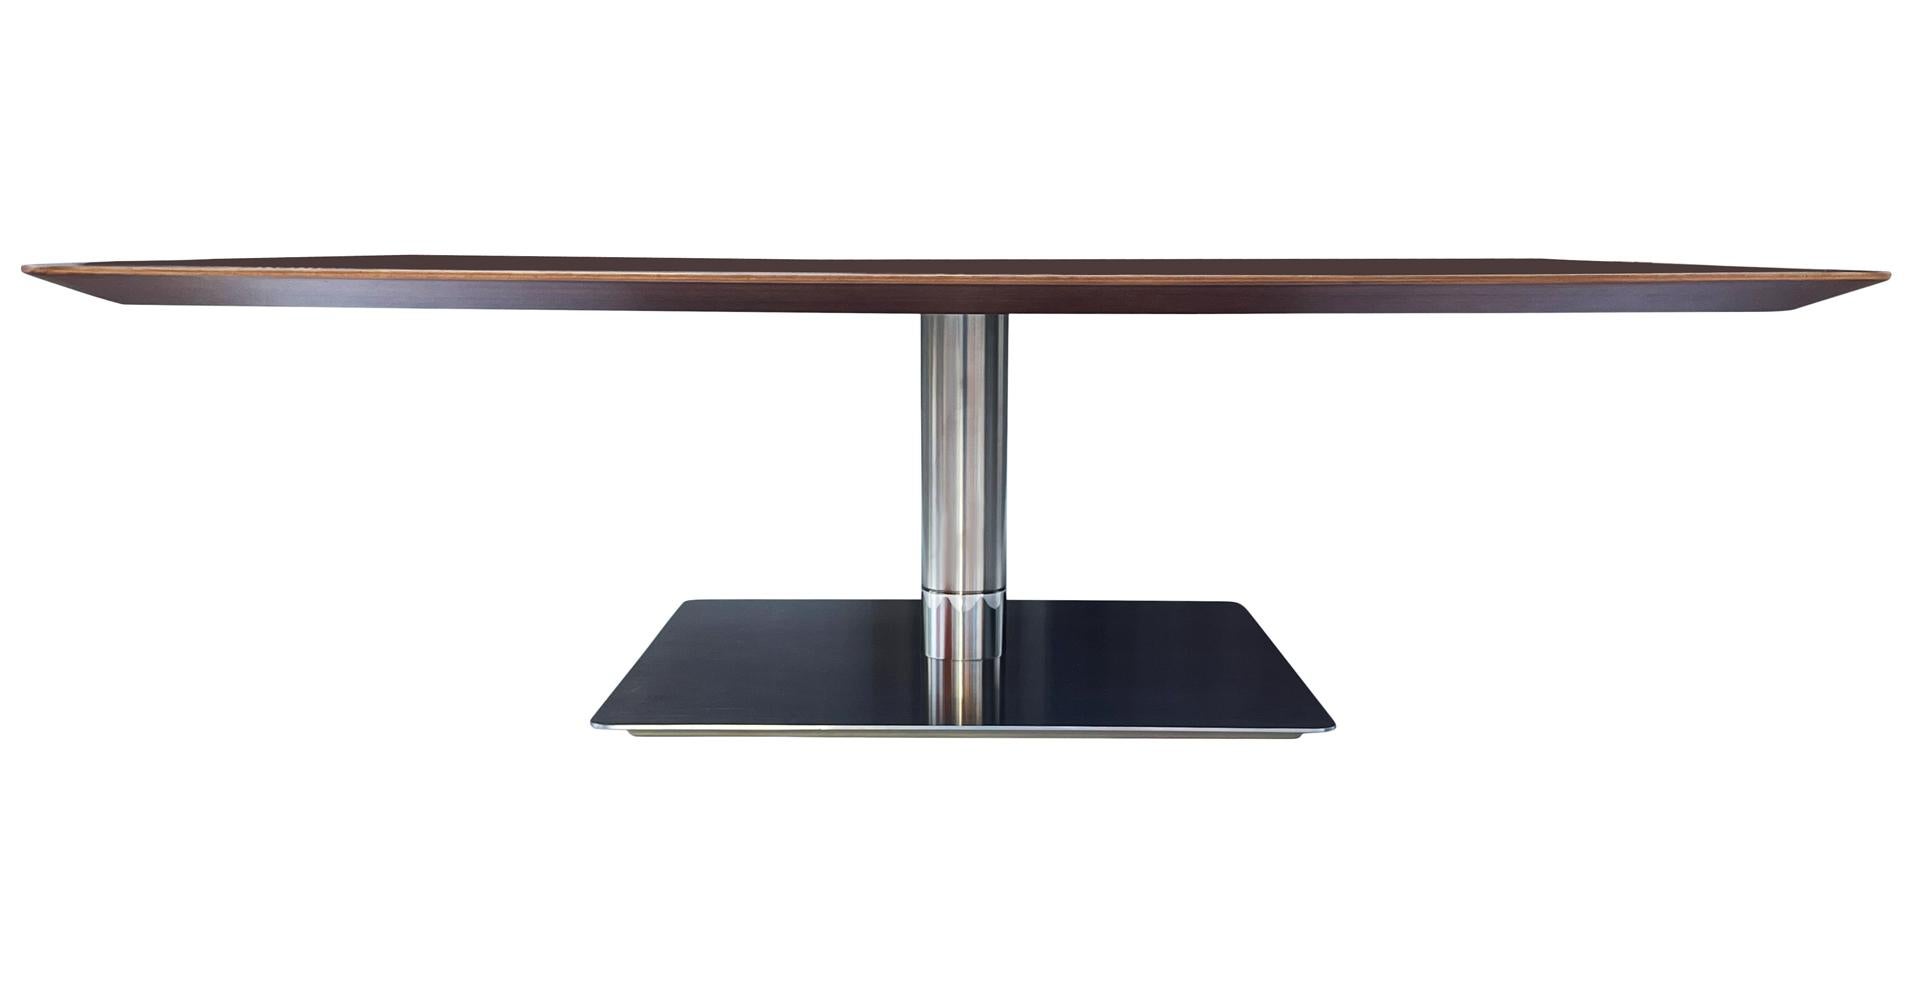 A simply gorgeous contemporary design made by Berhardt. It features a beautifully grained walnut top with heavy stainless steel base. Manufacturer label.